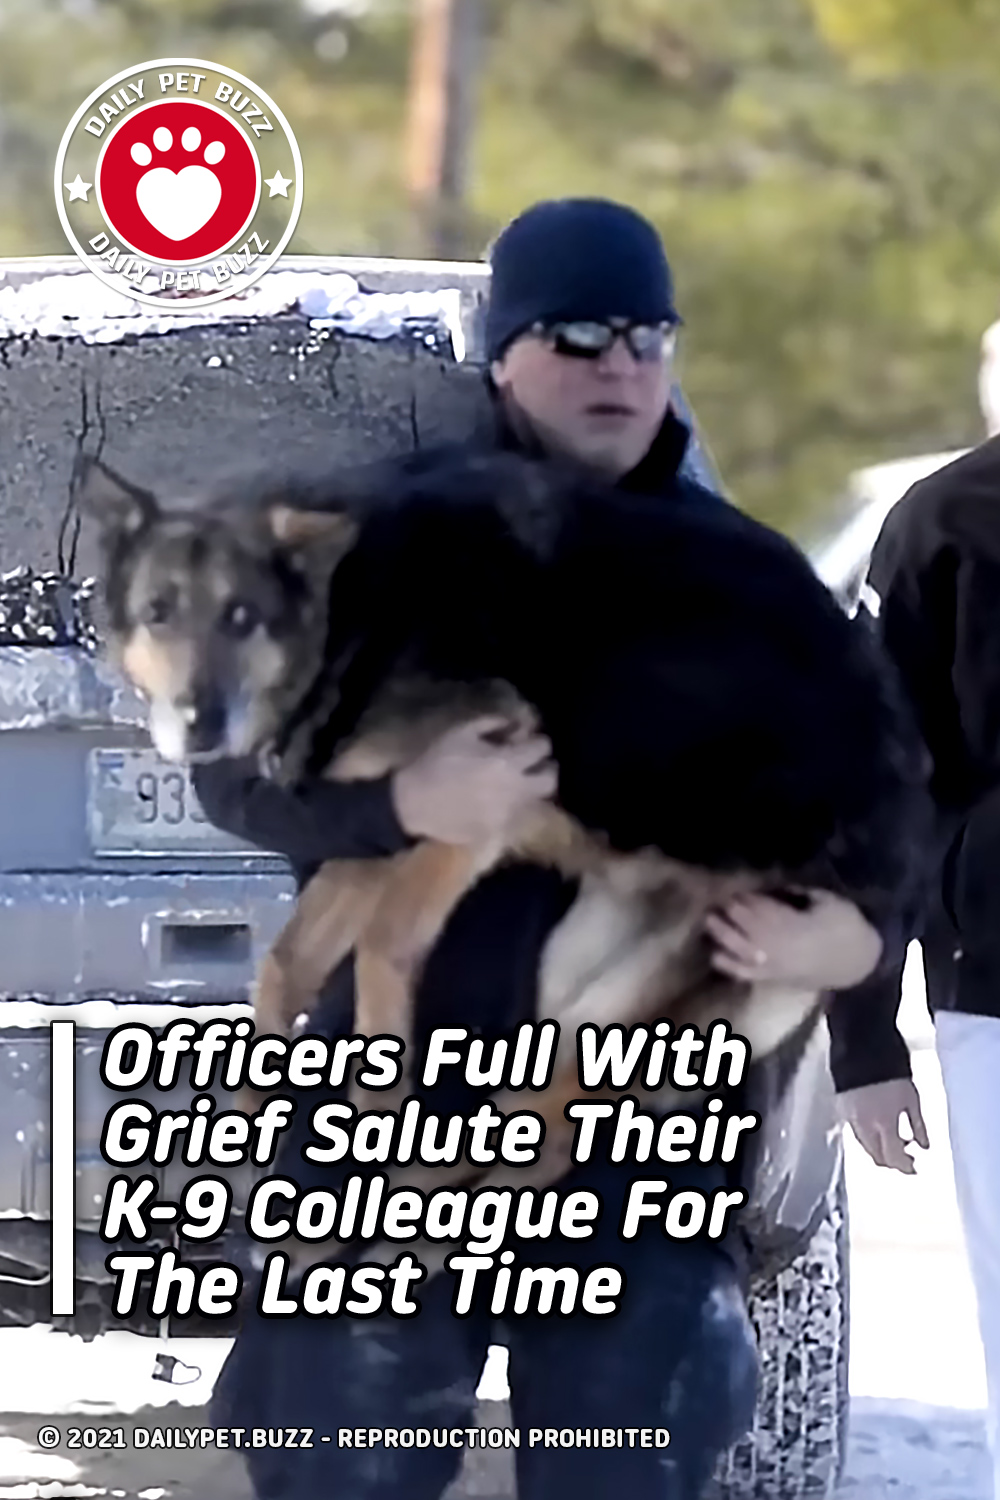 Officers Full With Grief Salute Their K-9 Colleague For The Last Time